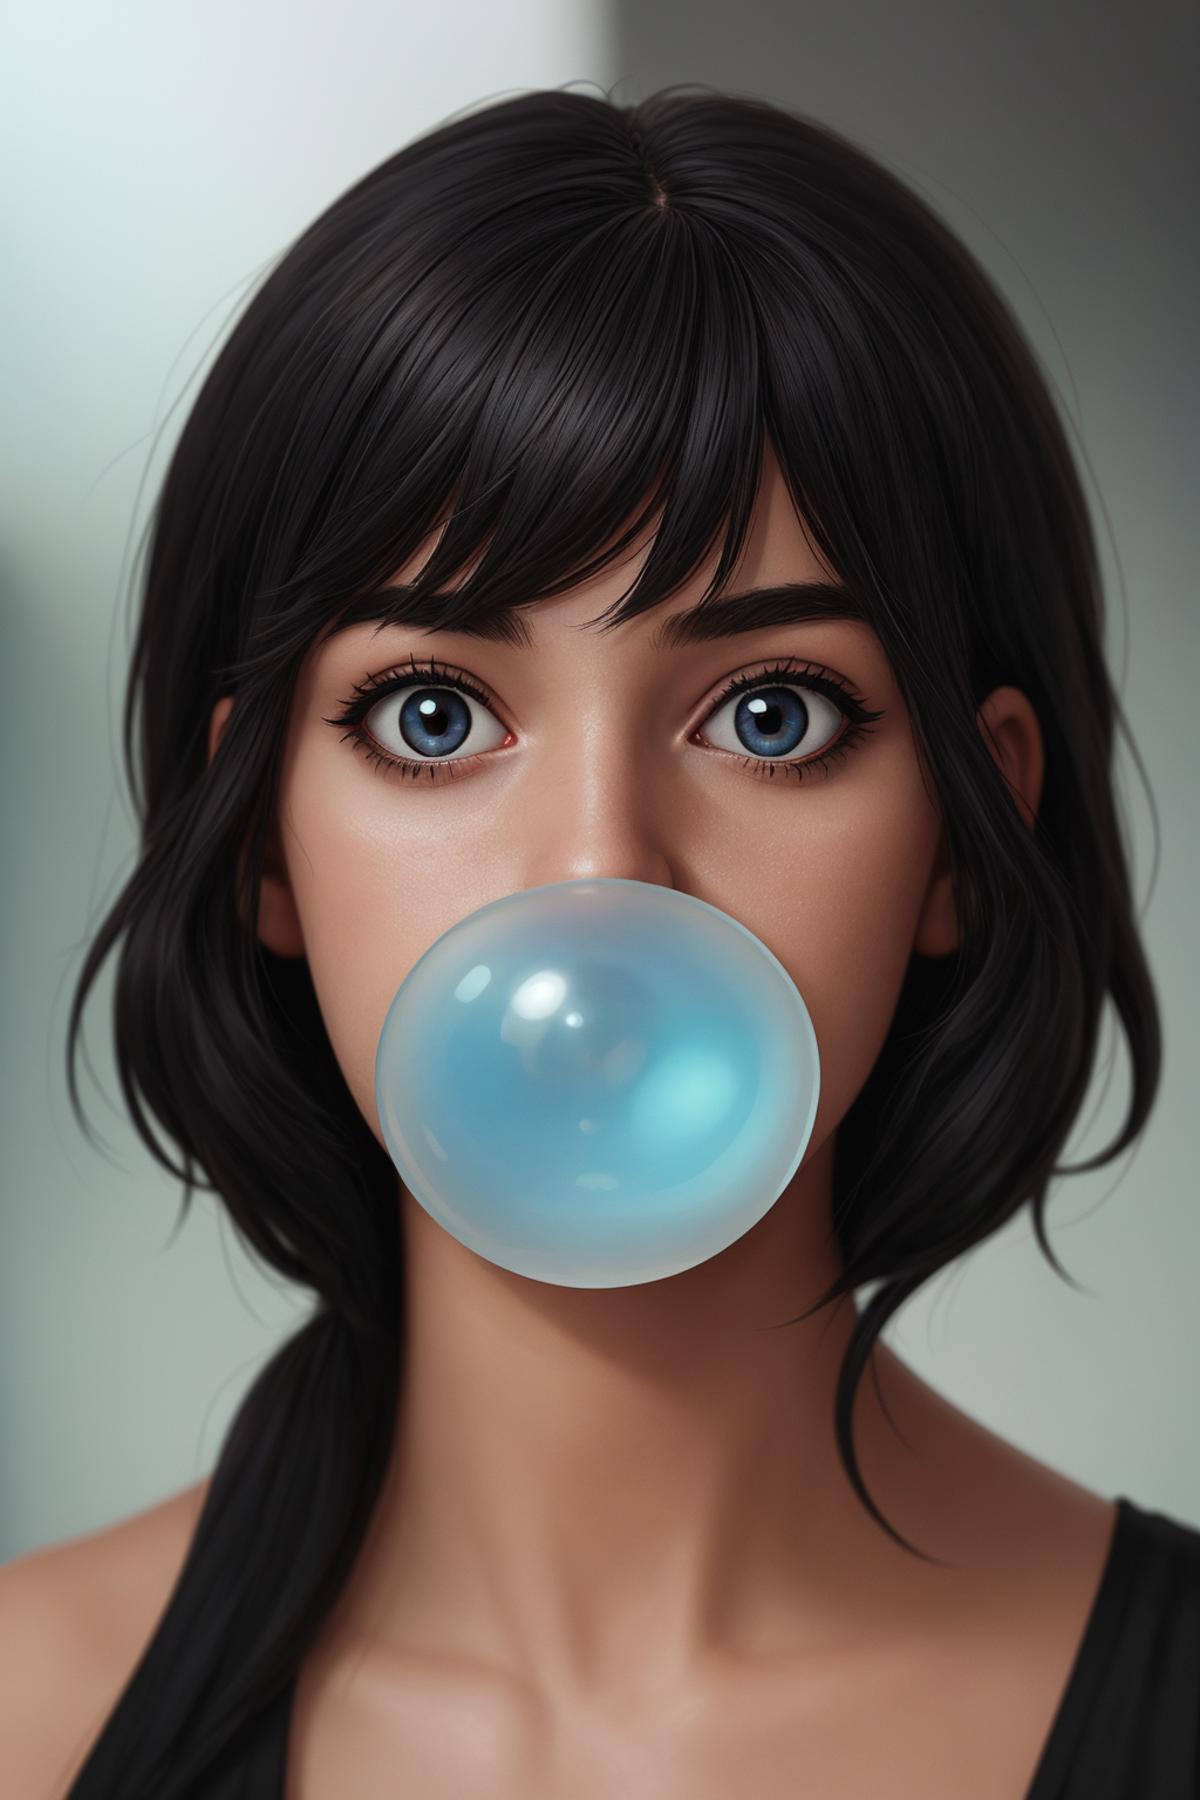 A beautiful girl with black hair and blue eyes blowing a large bubble.